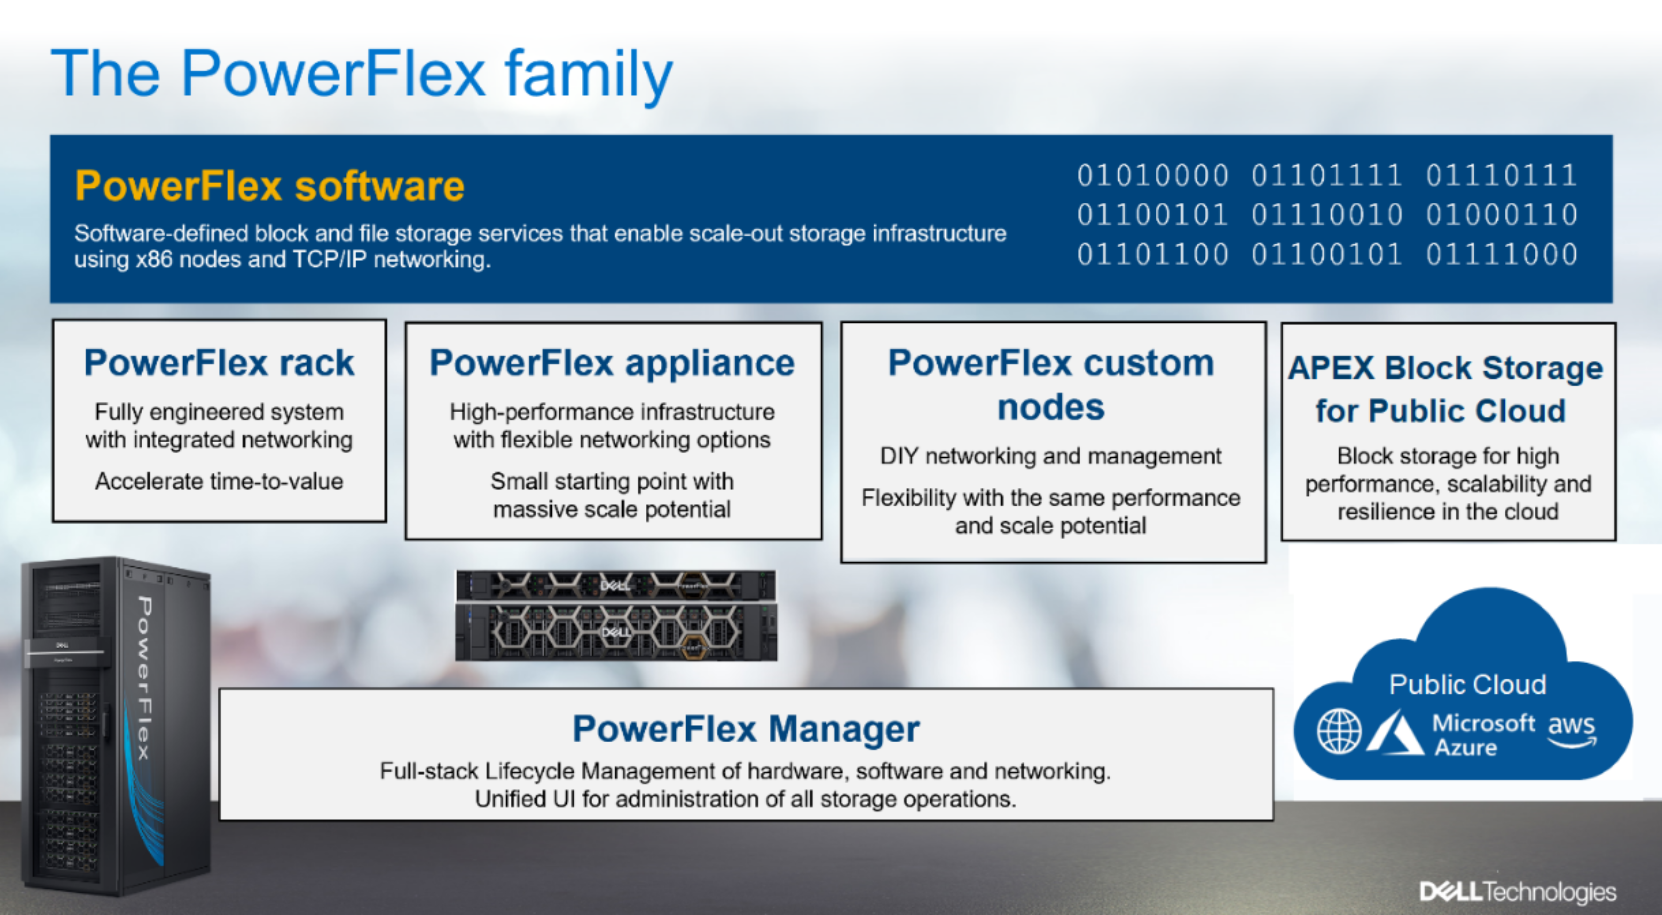 This figure describes the PowerFlex family components.